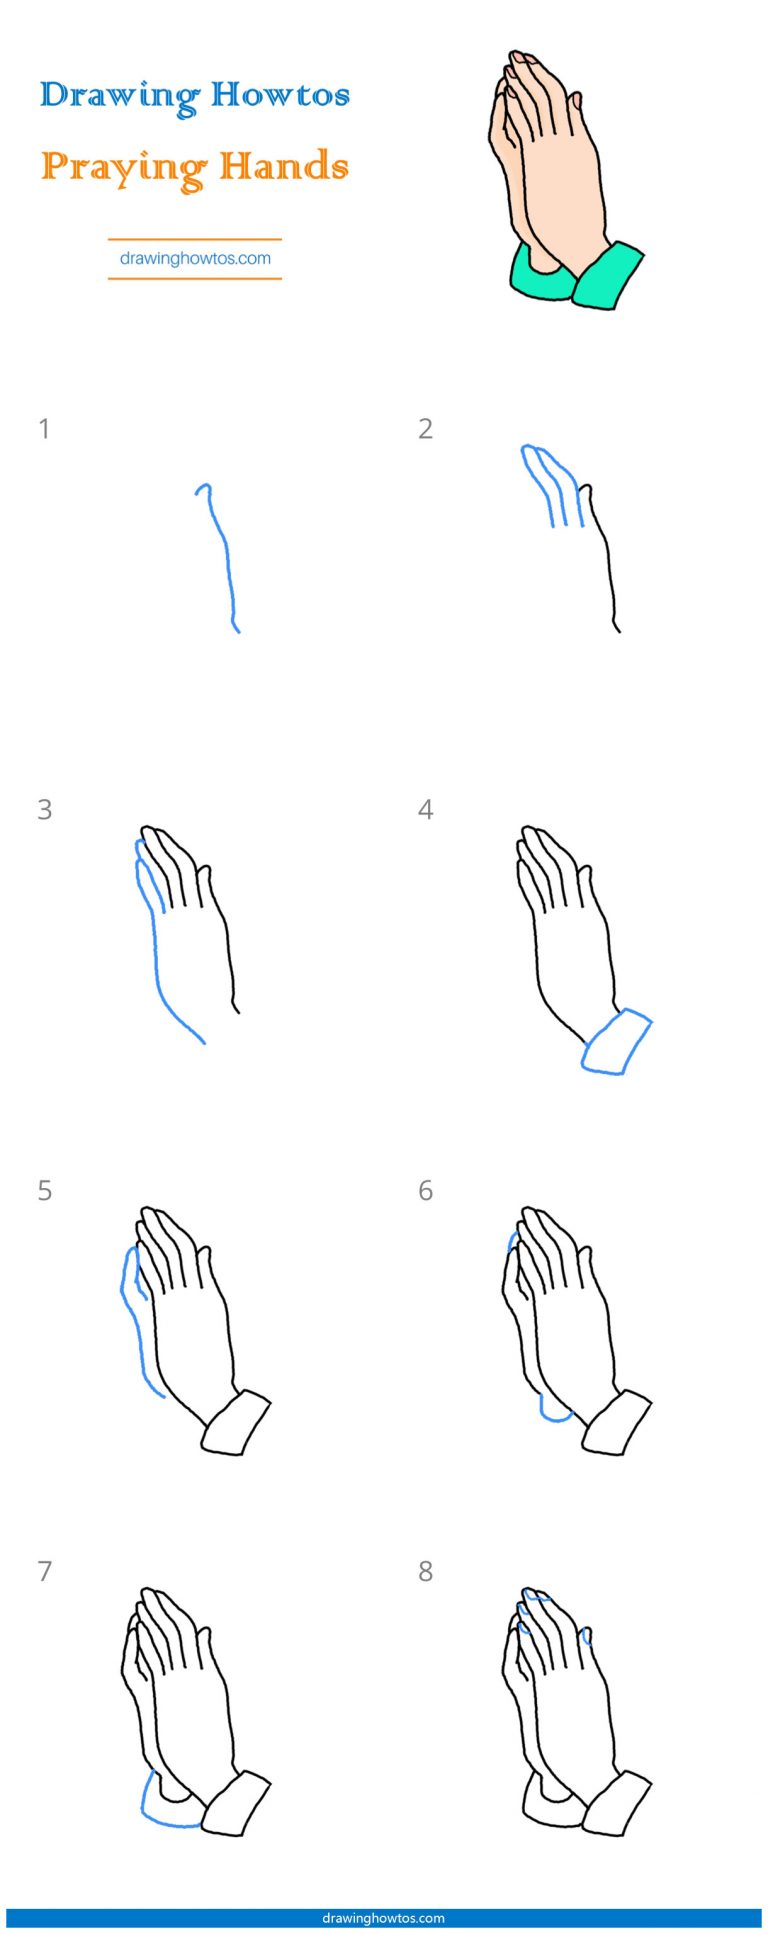 How to Draw Praying Hands - Step by Step Easy Drawing Guides - Drawing 